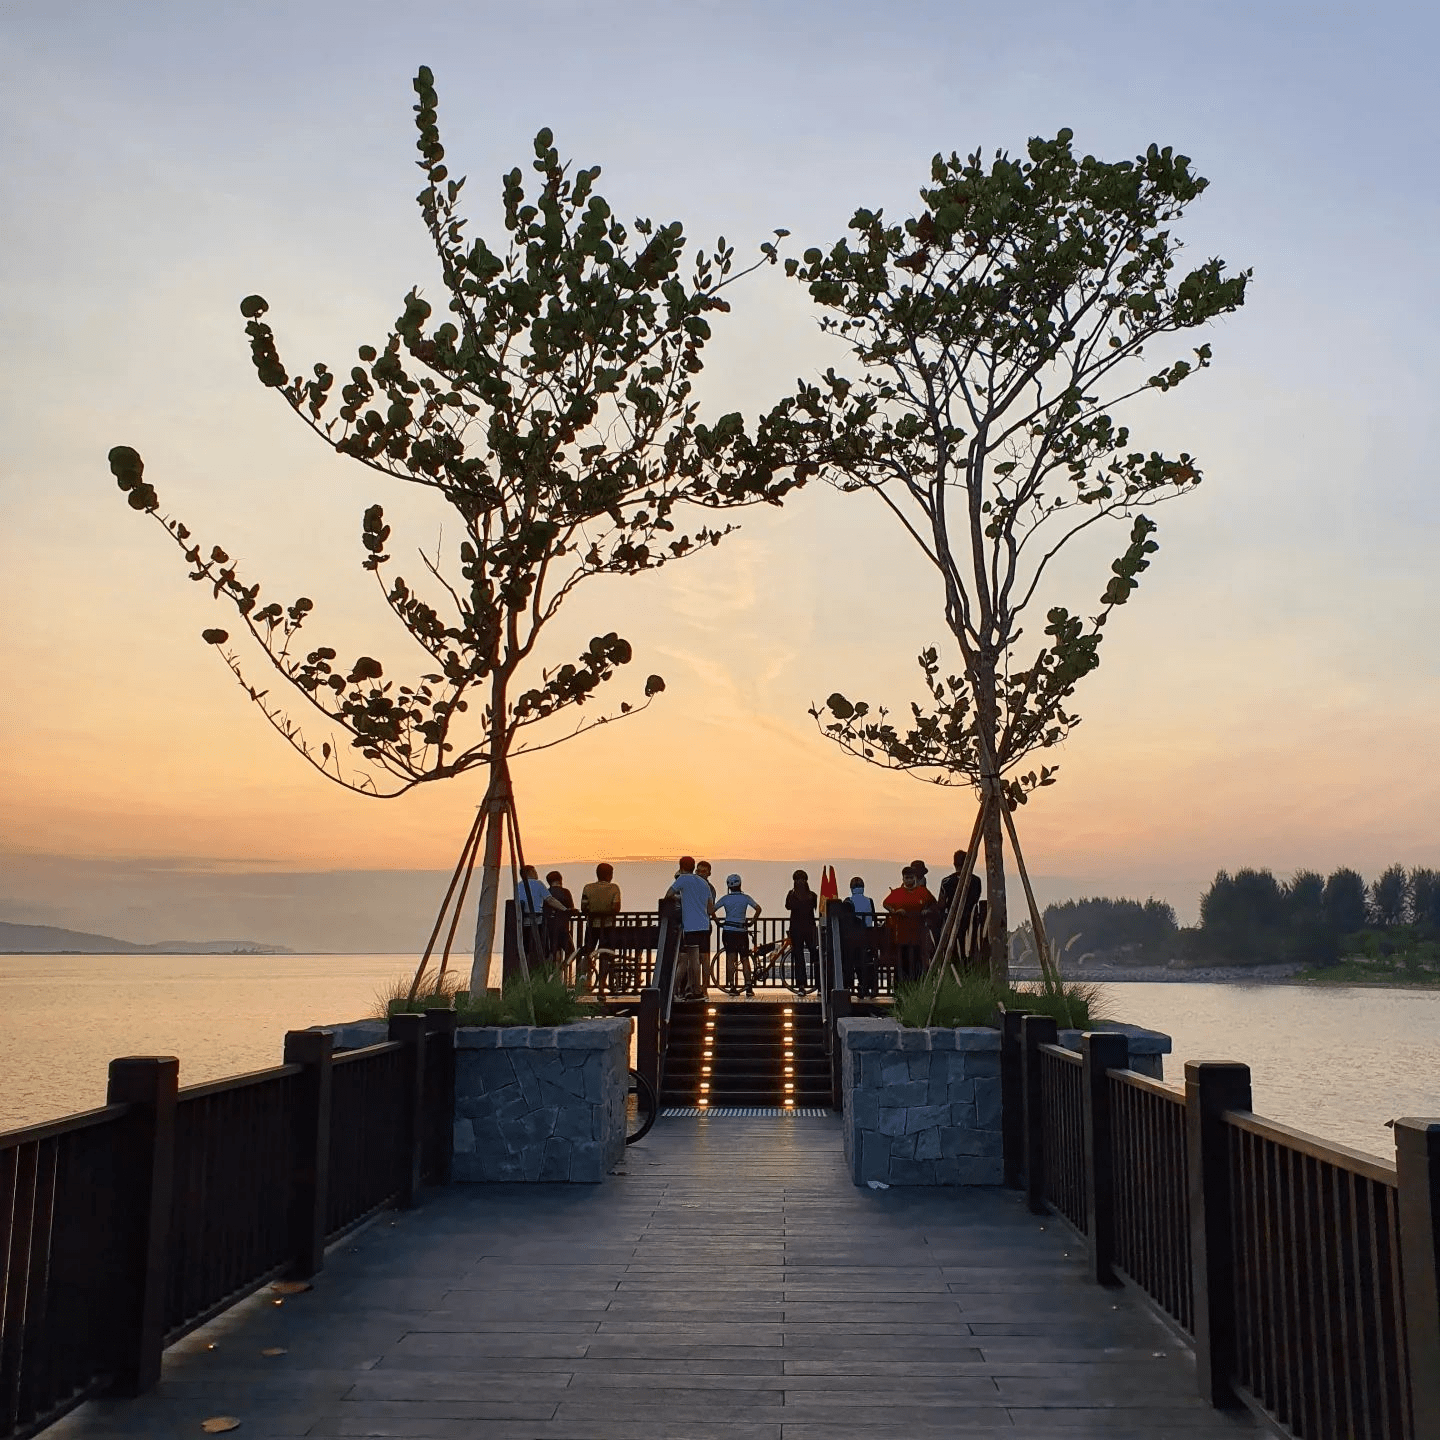 people standing at a dock watching the sunrise in Singapore